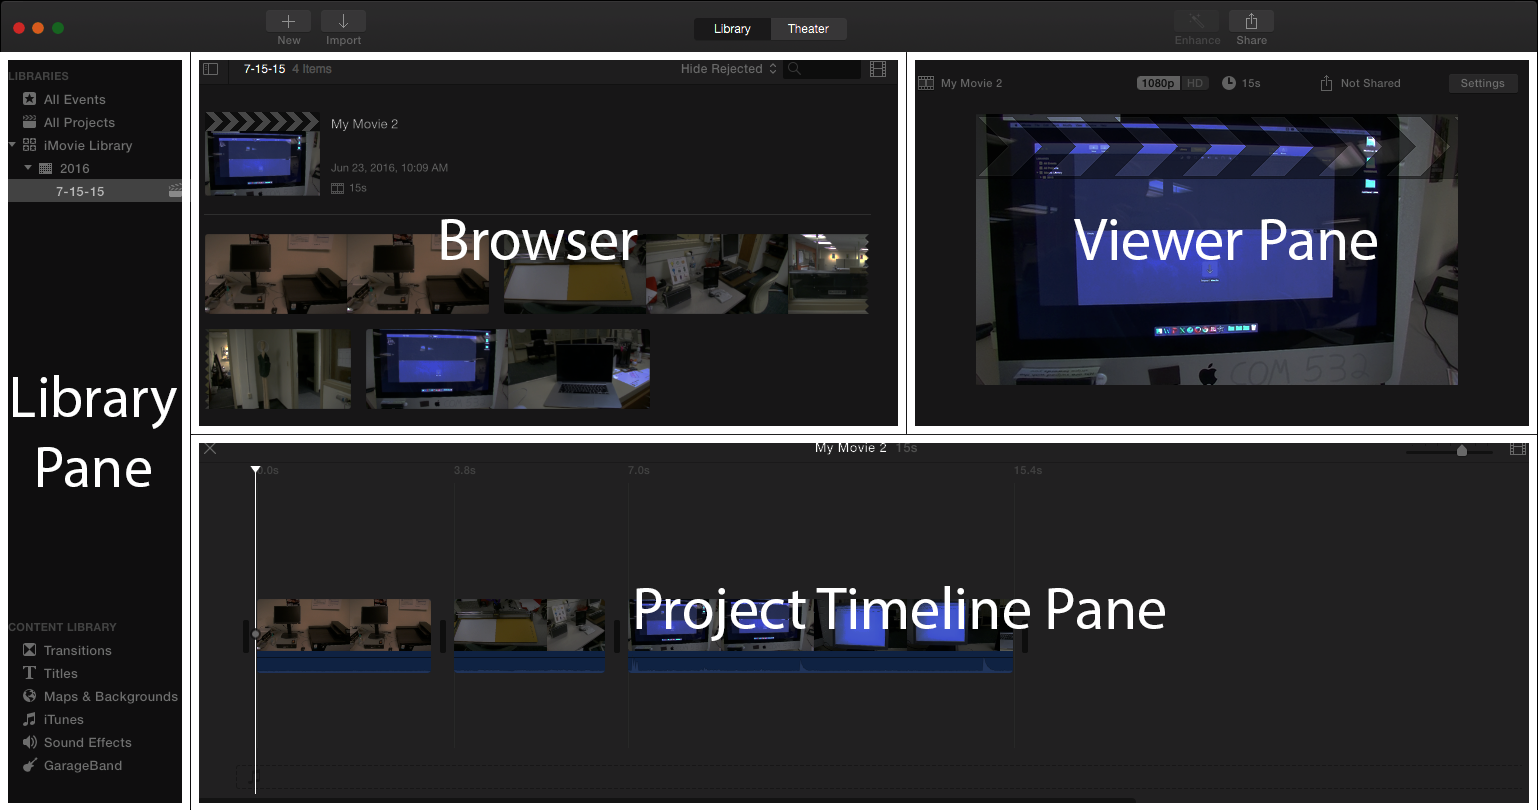 iMove screenshot, with Library Pane, Browser, Viewer Pane, and Project Timeline Pane labelled